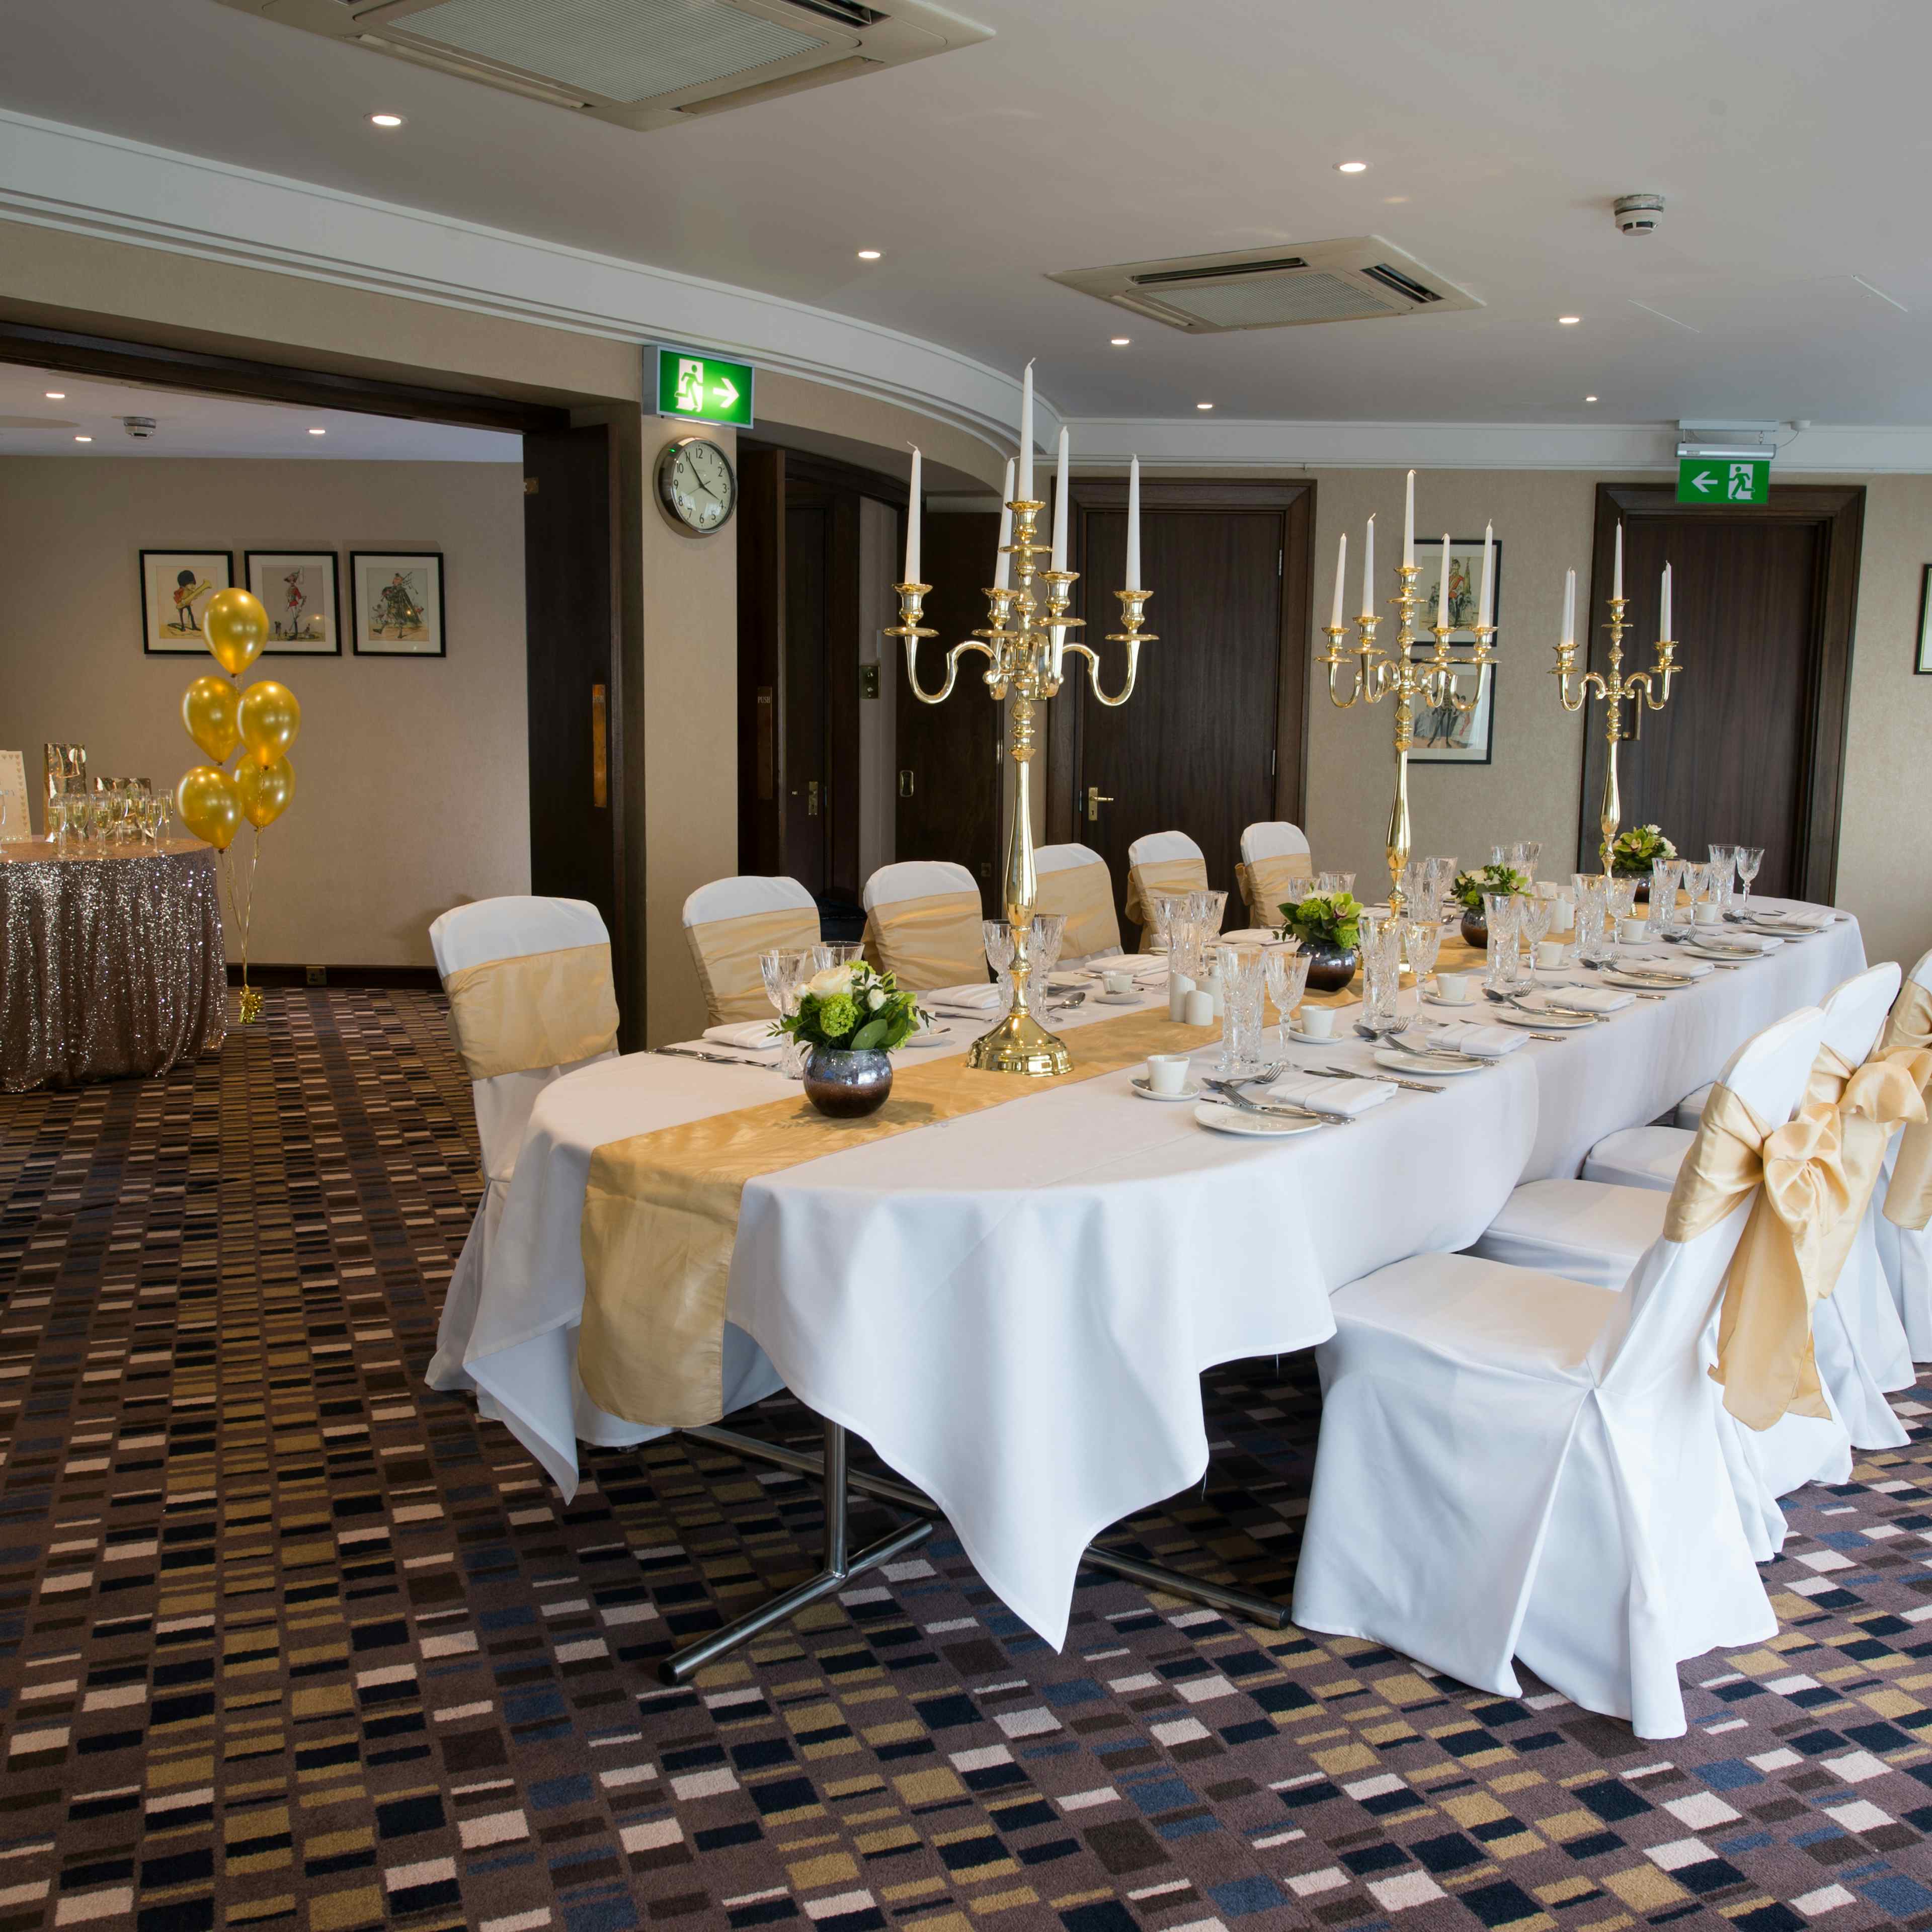 Victory Services Club - Allenby Room & Plumer image 2